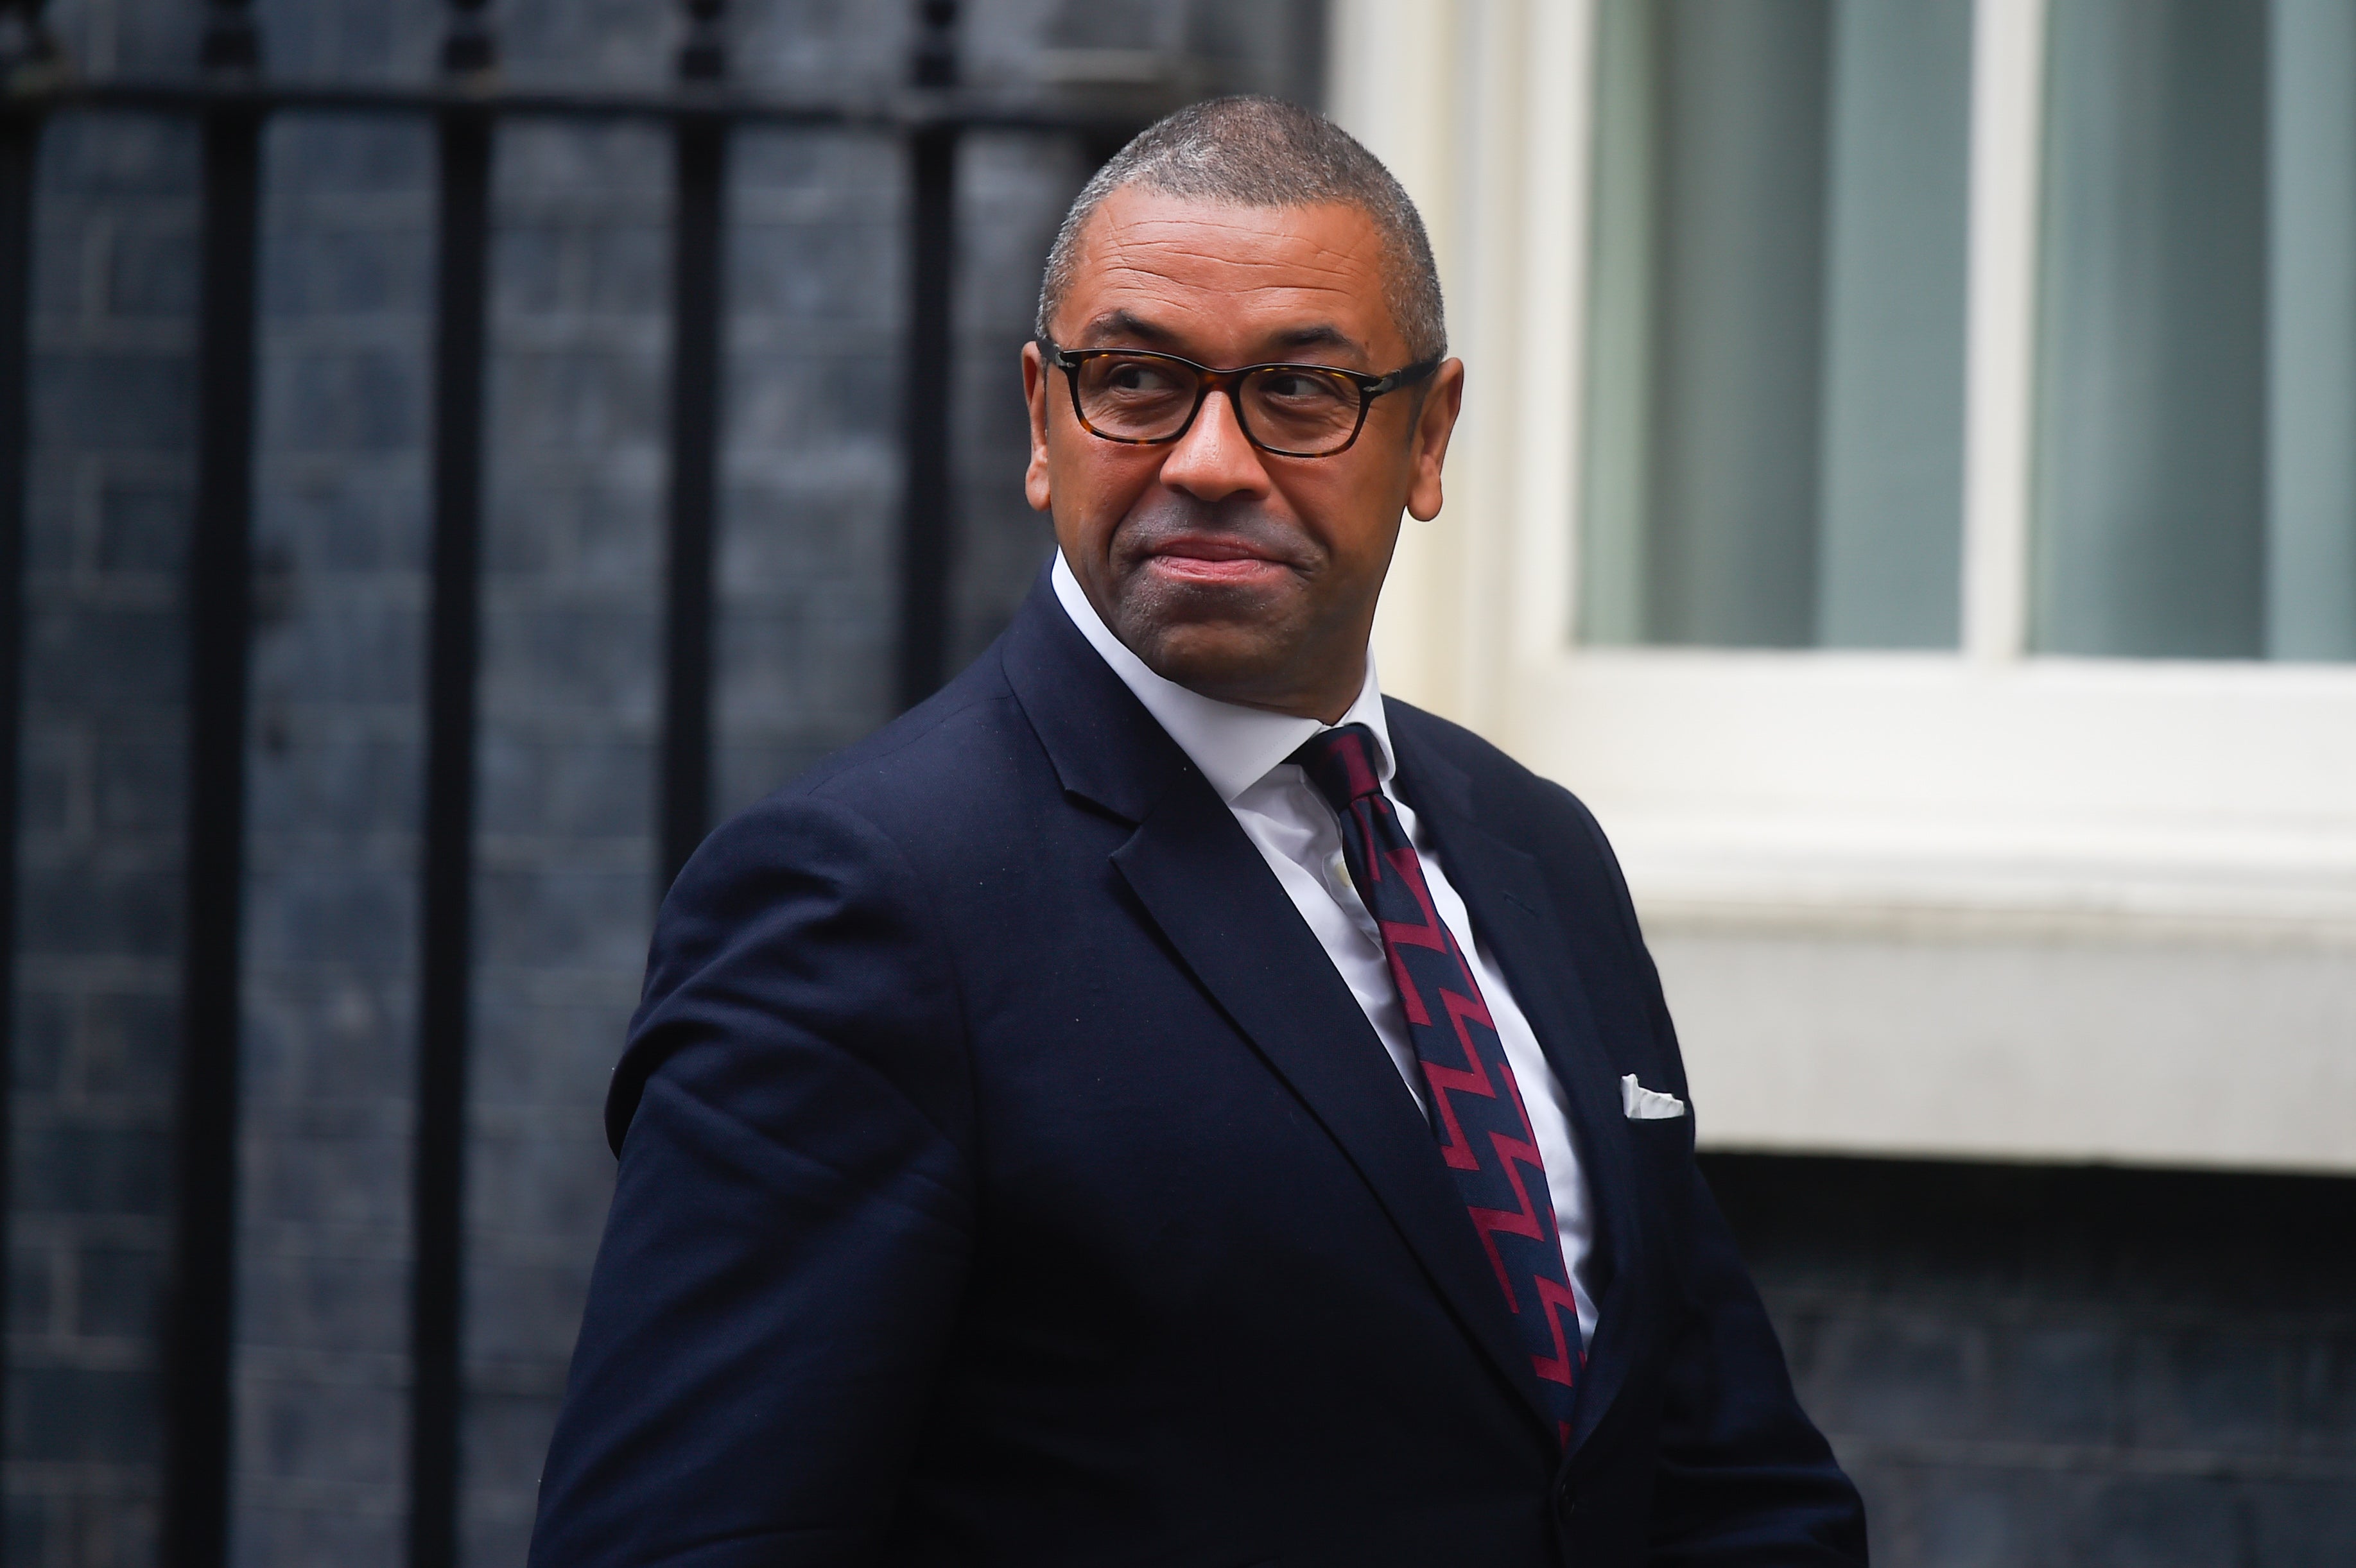 James Cleverley recently announced a series of new measures to tackle spiking